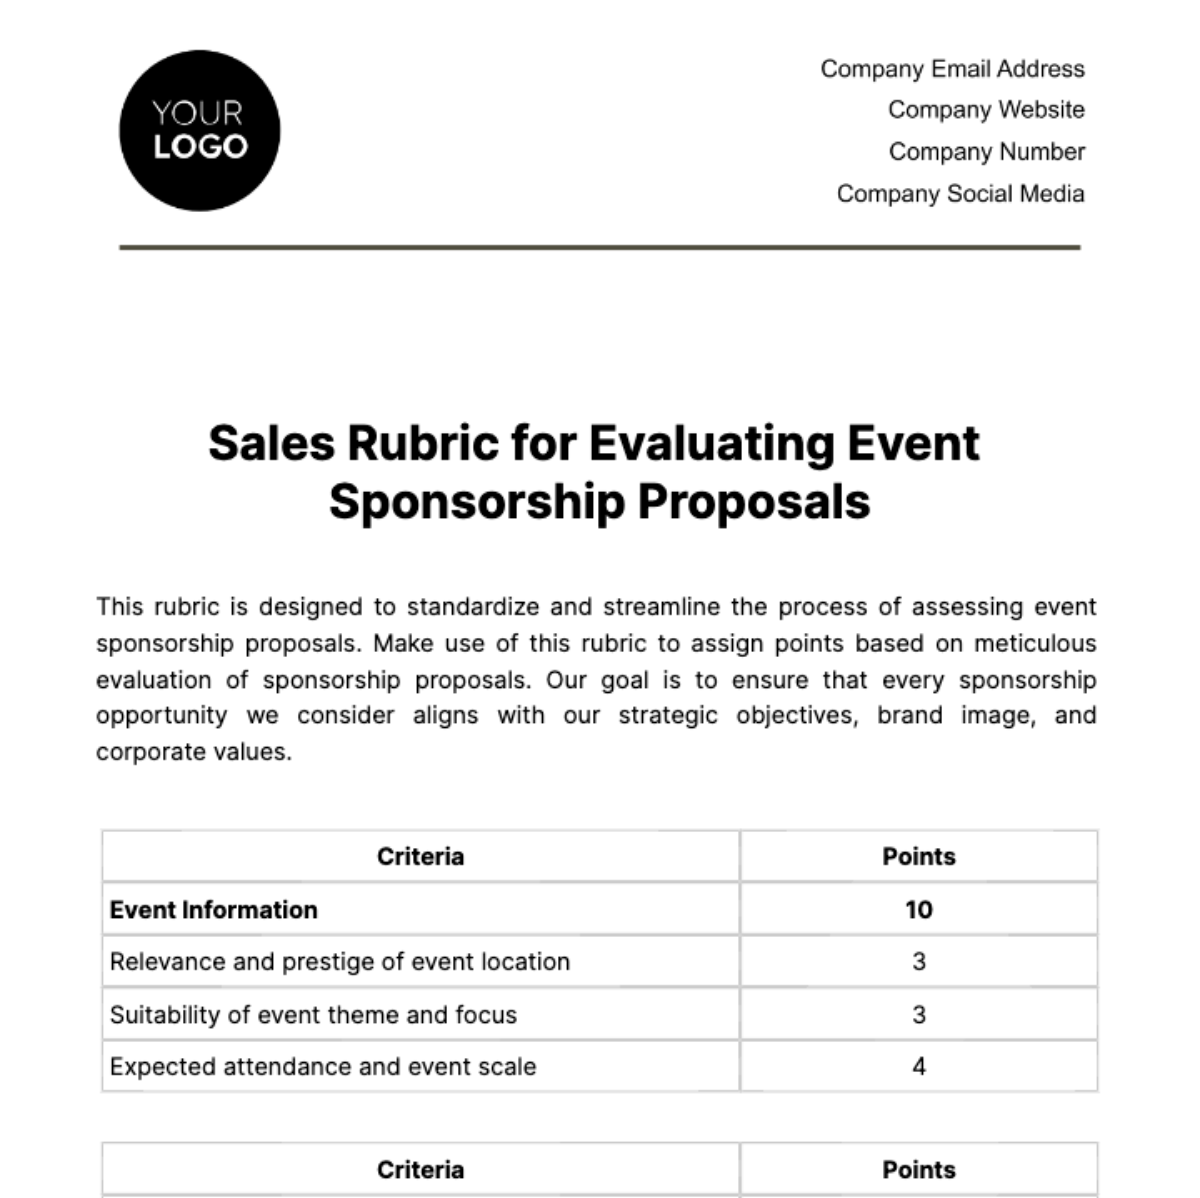 Free Sales Rubric for Evaluating Event Sponsorship Proposals Template